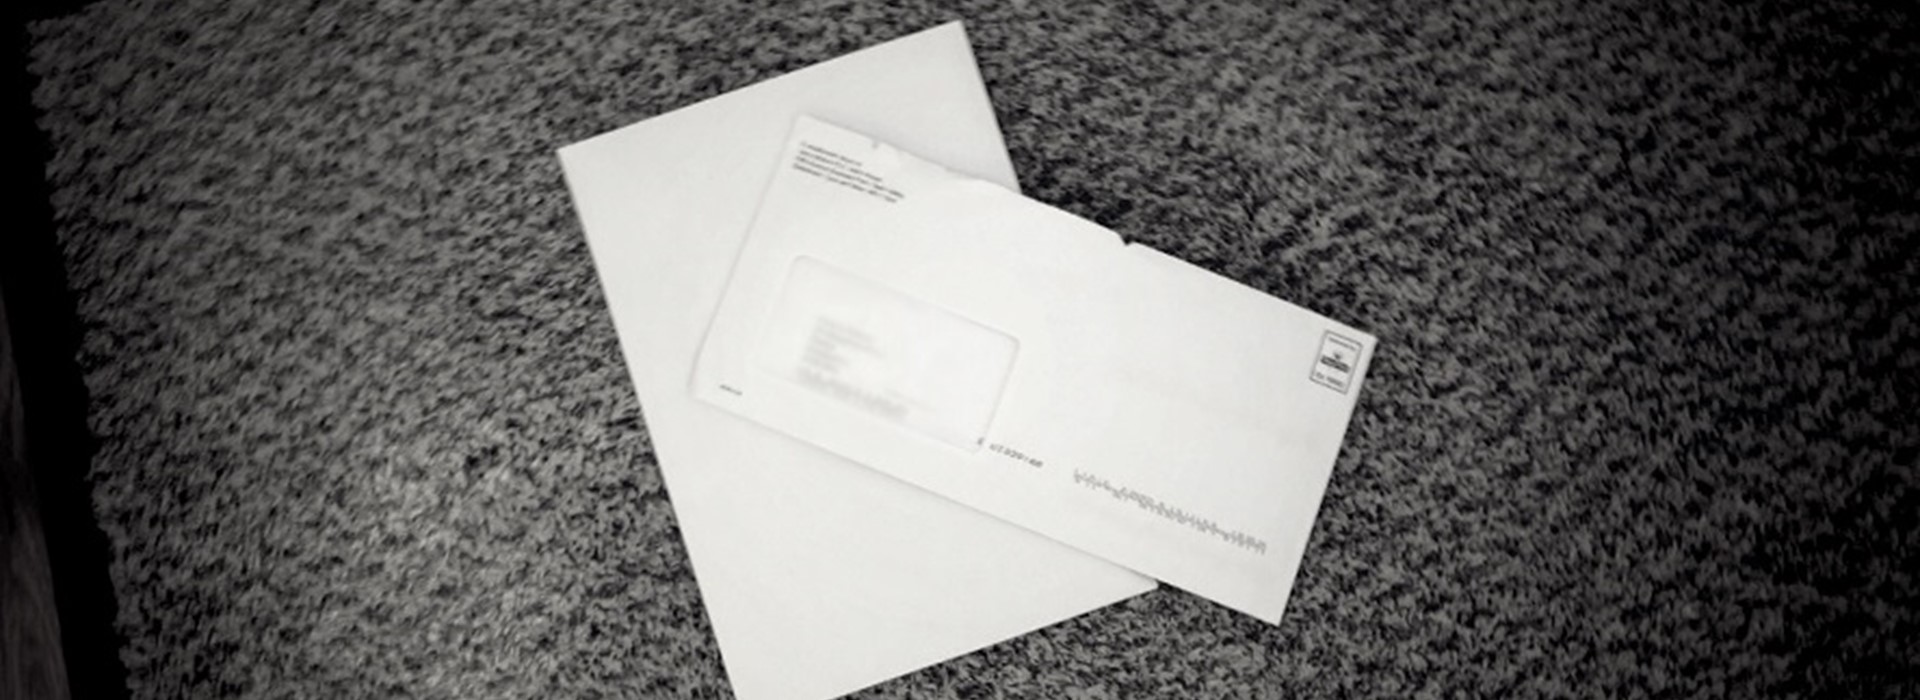 Letter or NOIP ticket